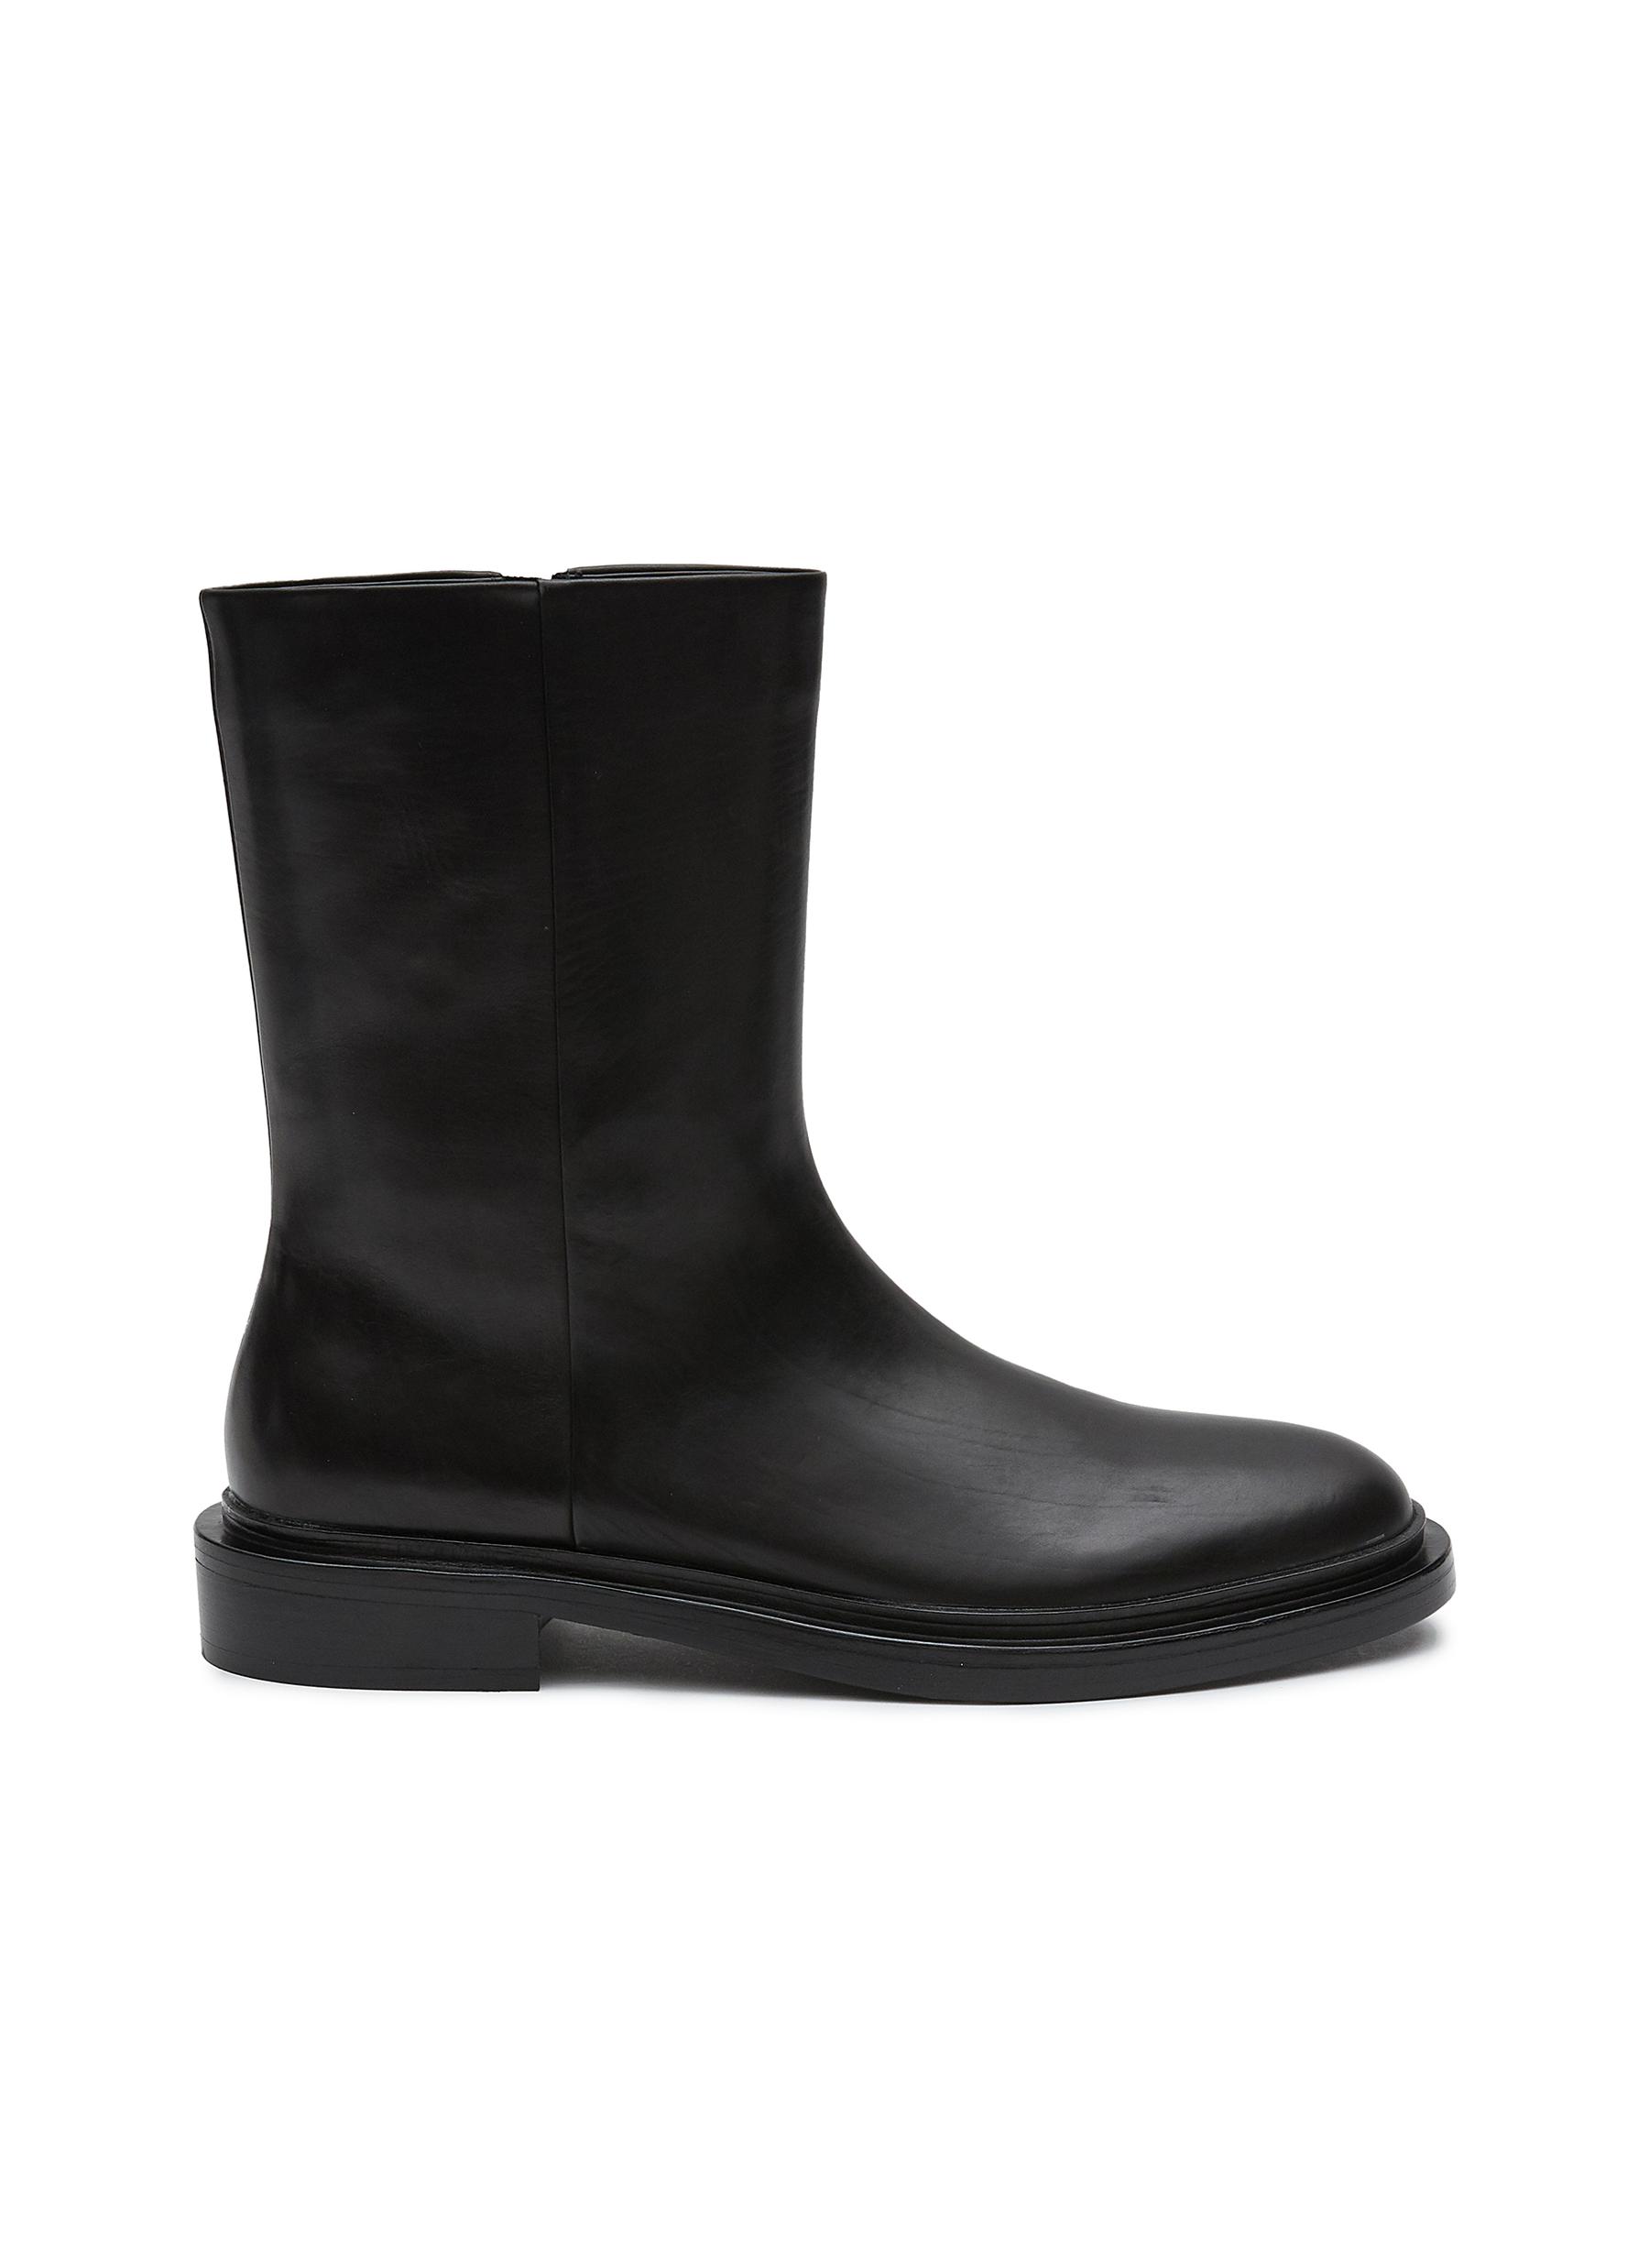 EQUIL ‘BERLIN' ROUND TOE LEATHER BOOTS